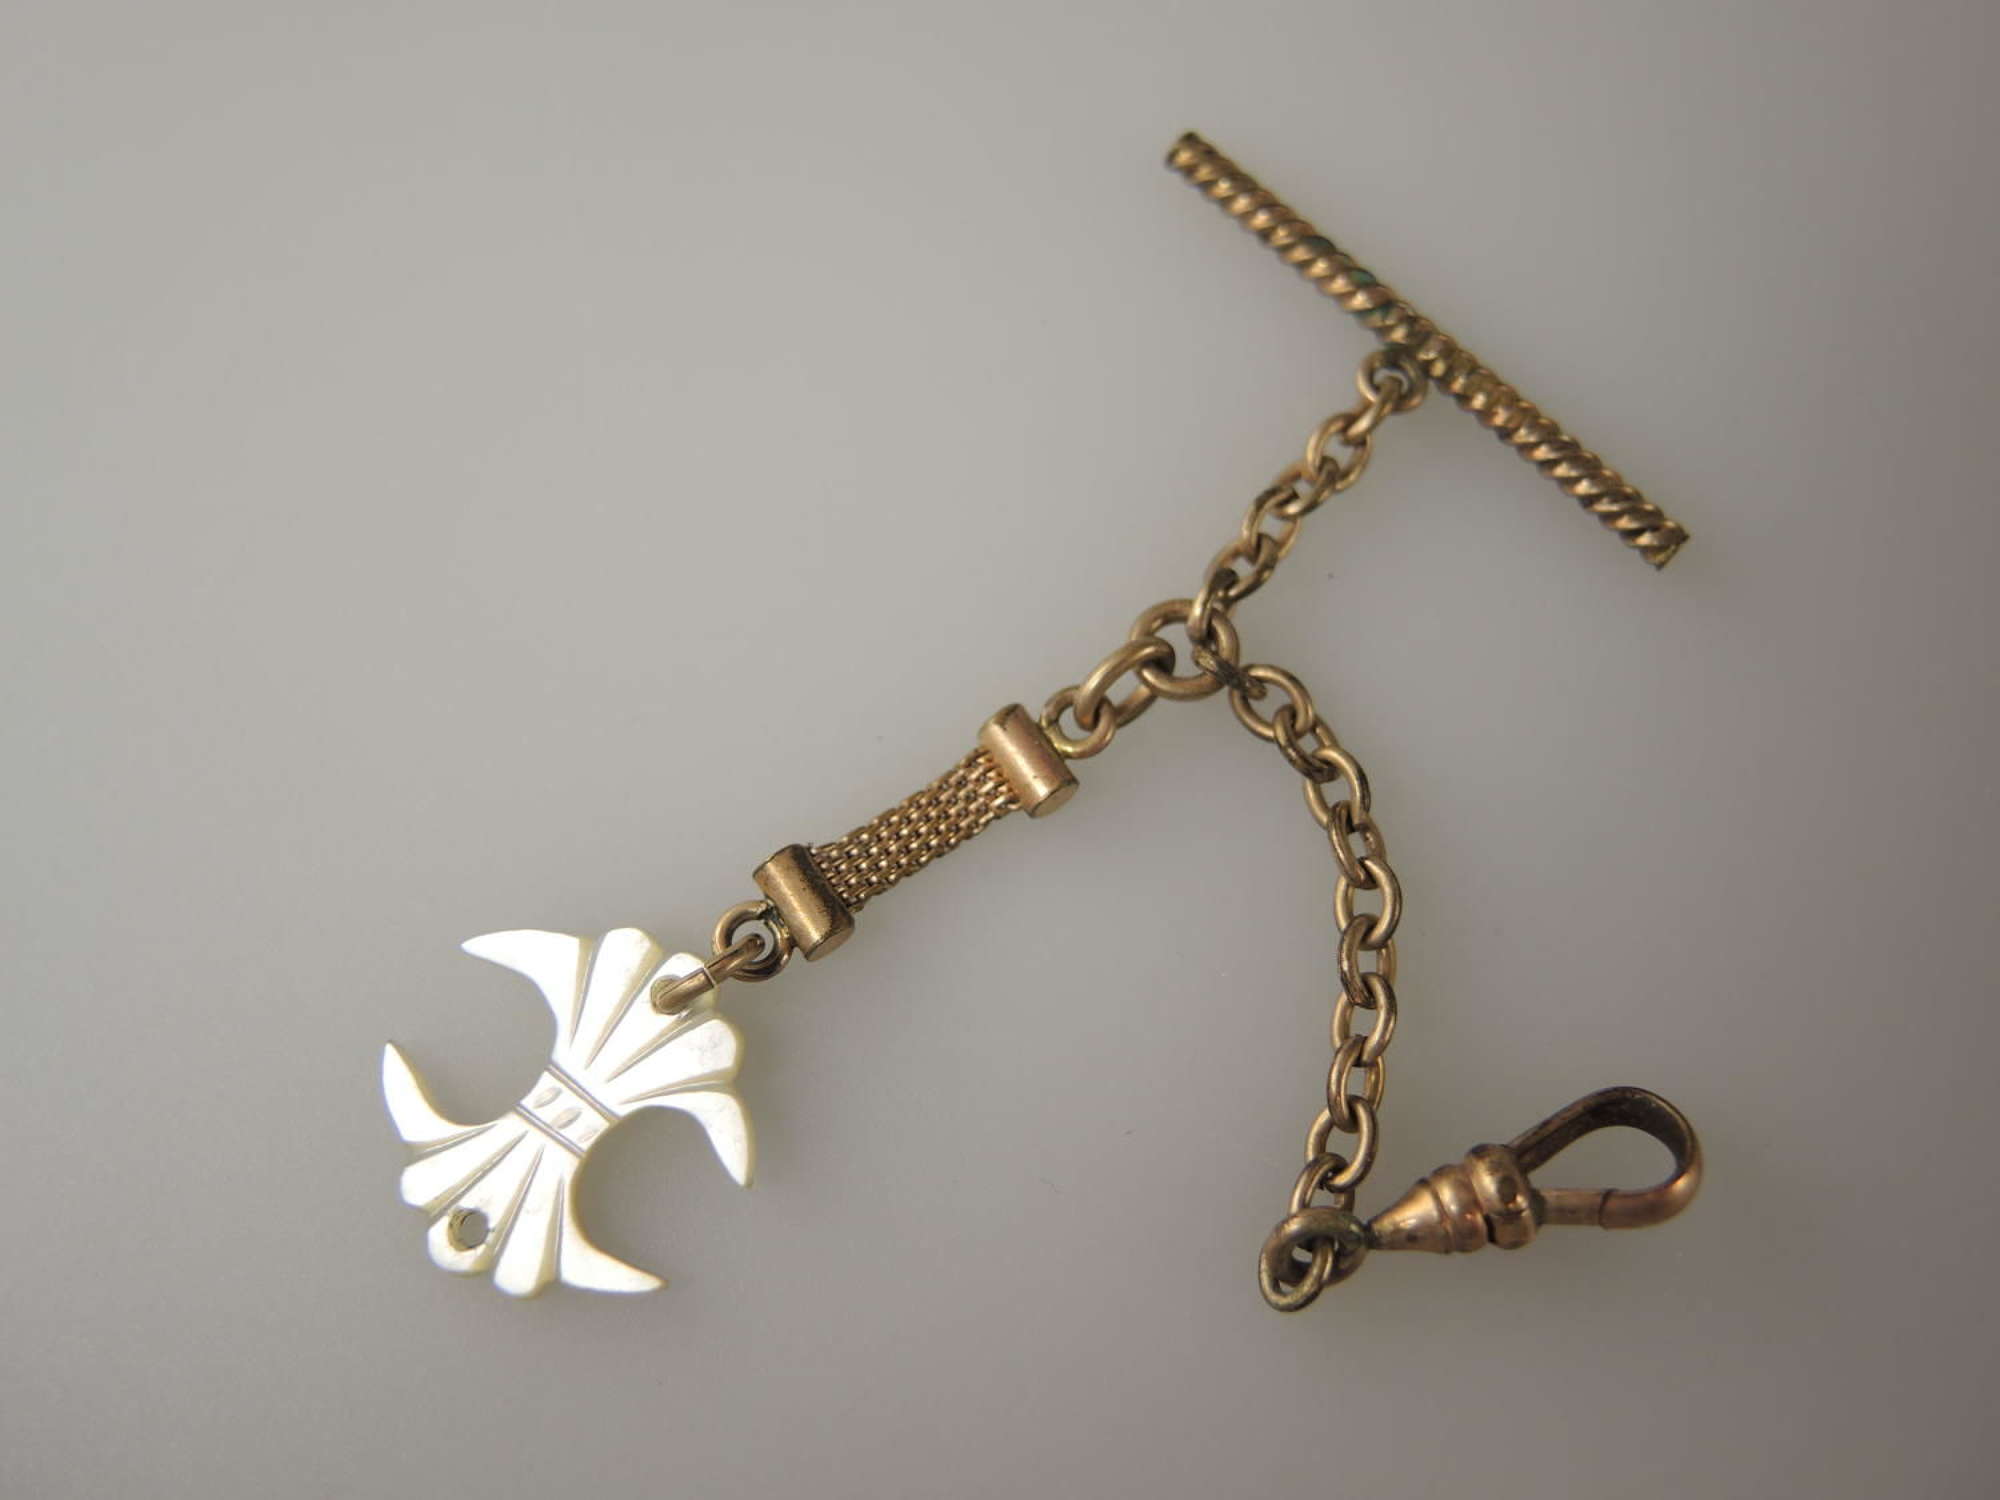 Gilt Watch Chain with a Mother of Pearl Fob. Circa 1890